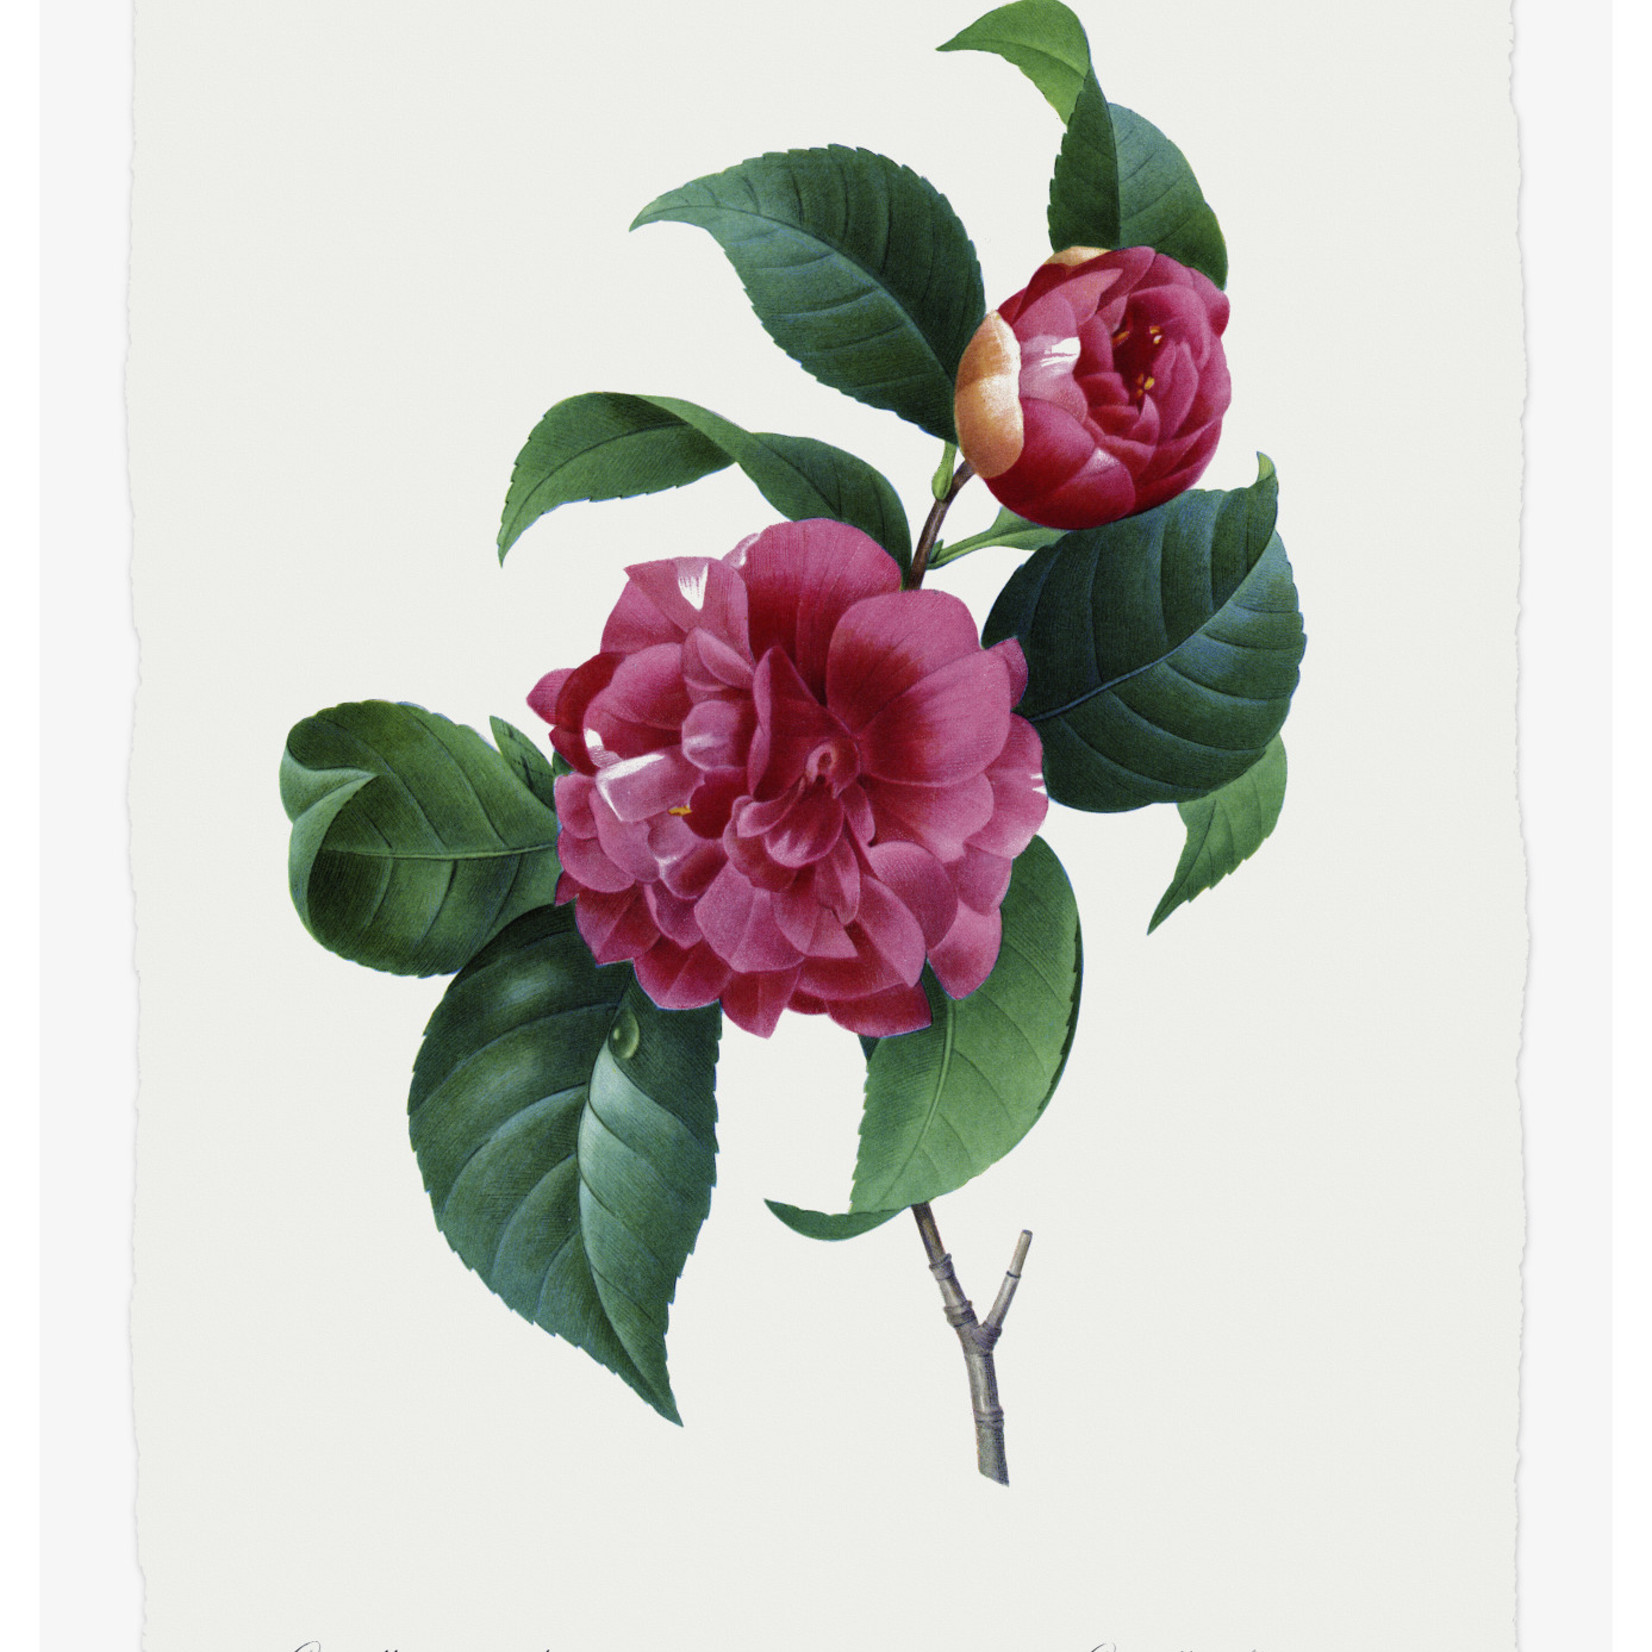 Framed Print on Rag Paper: Camelia Panachee by Redoute